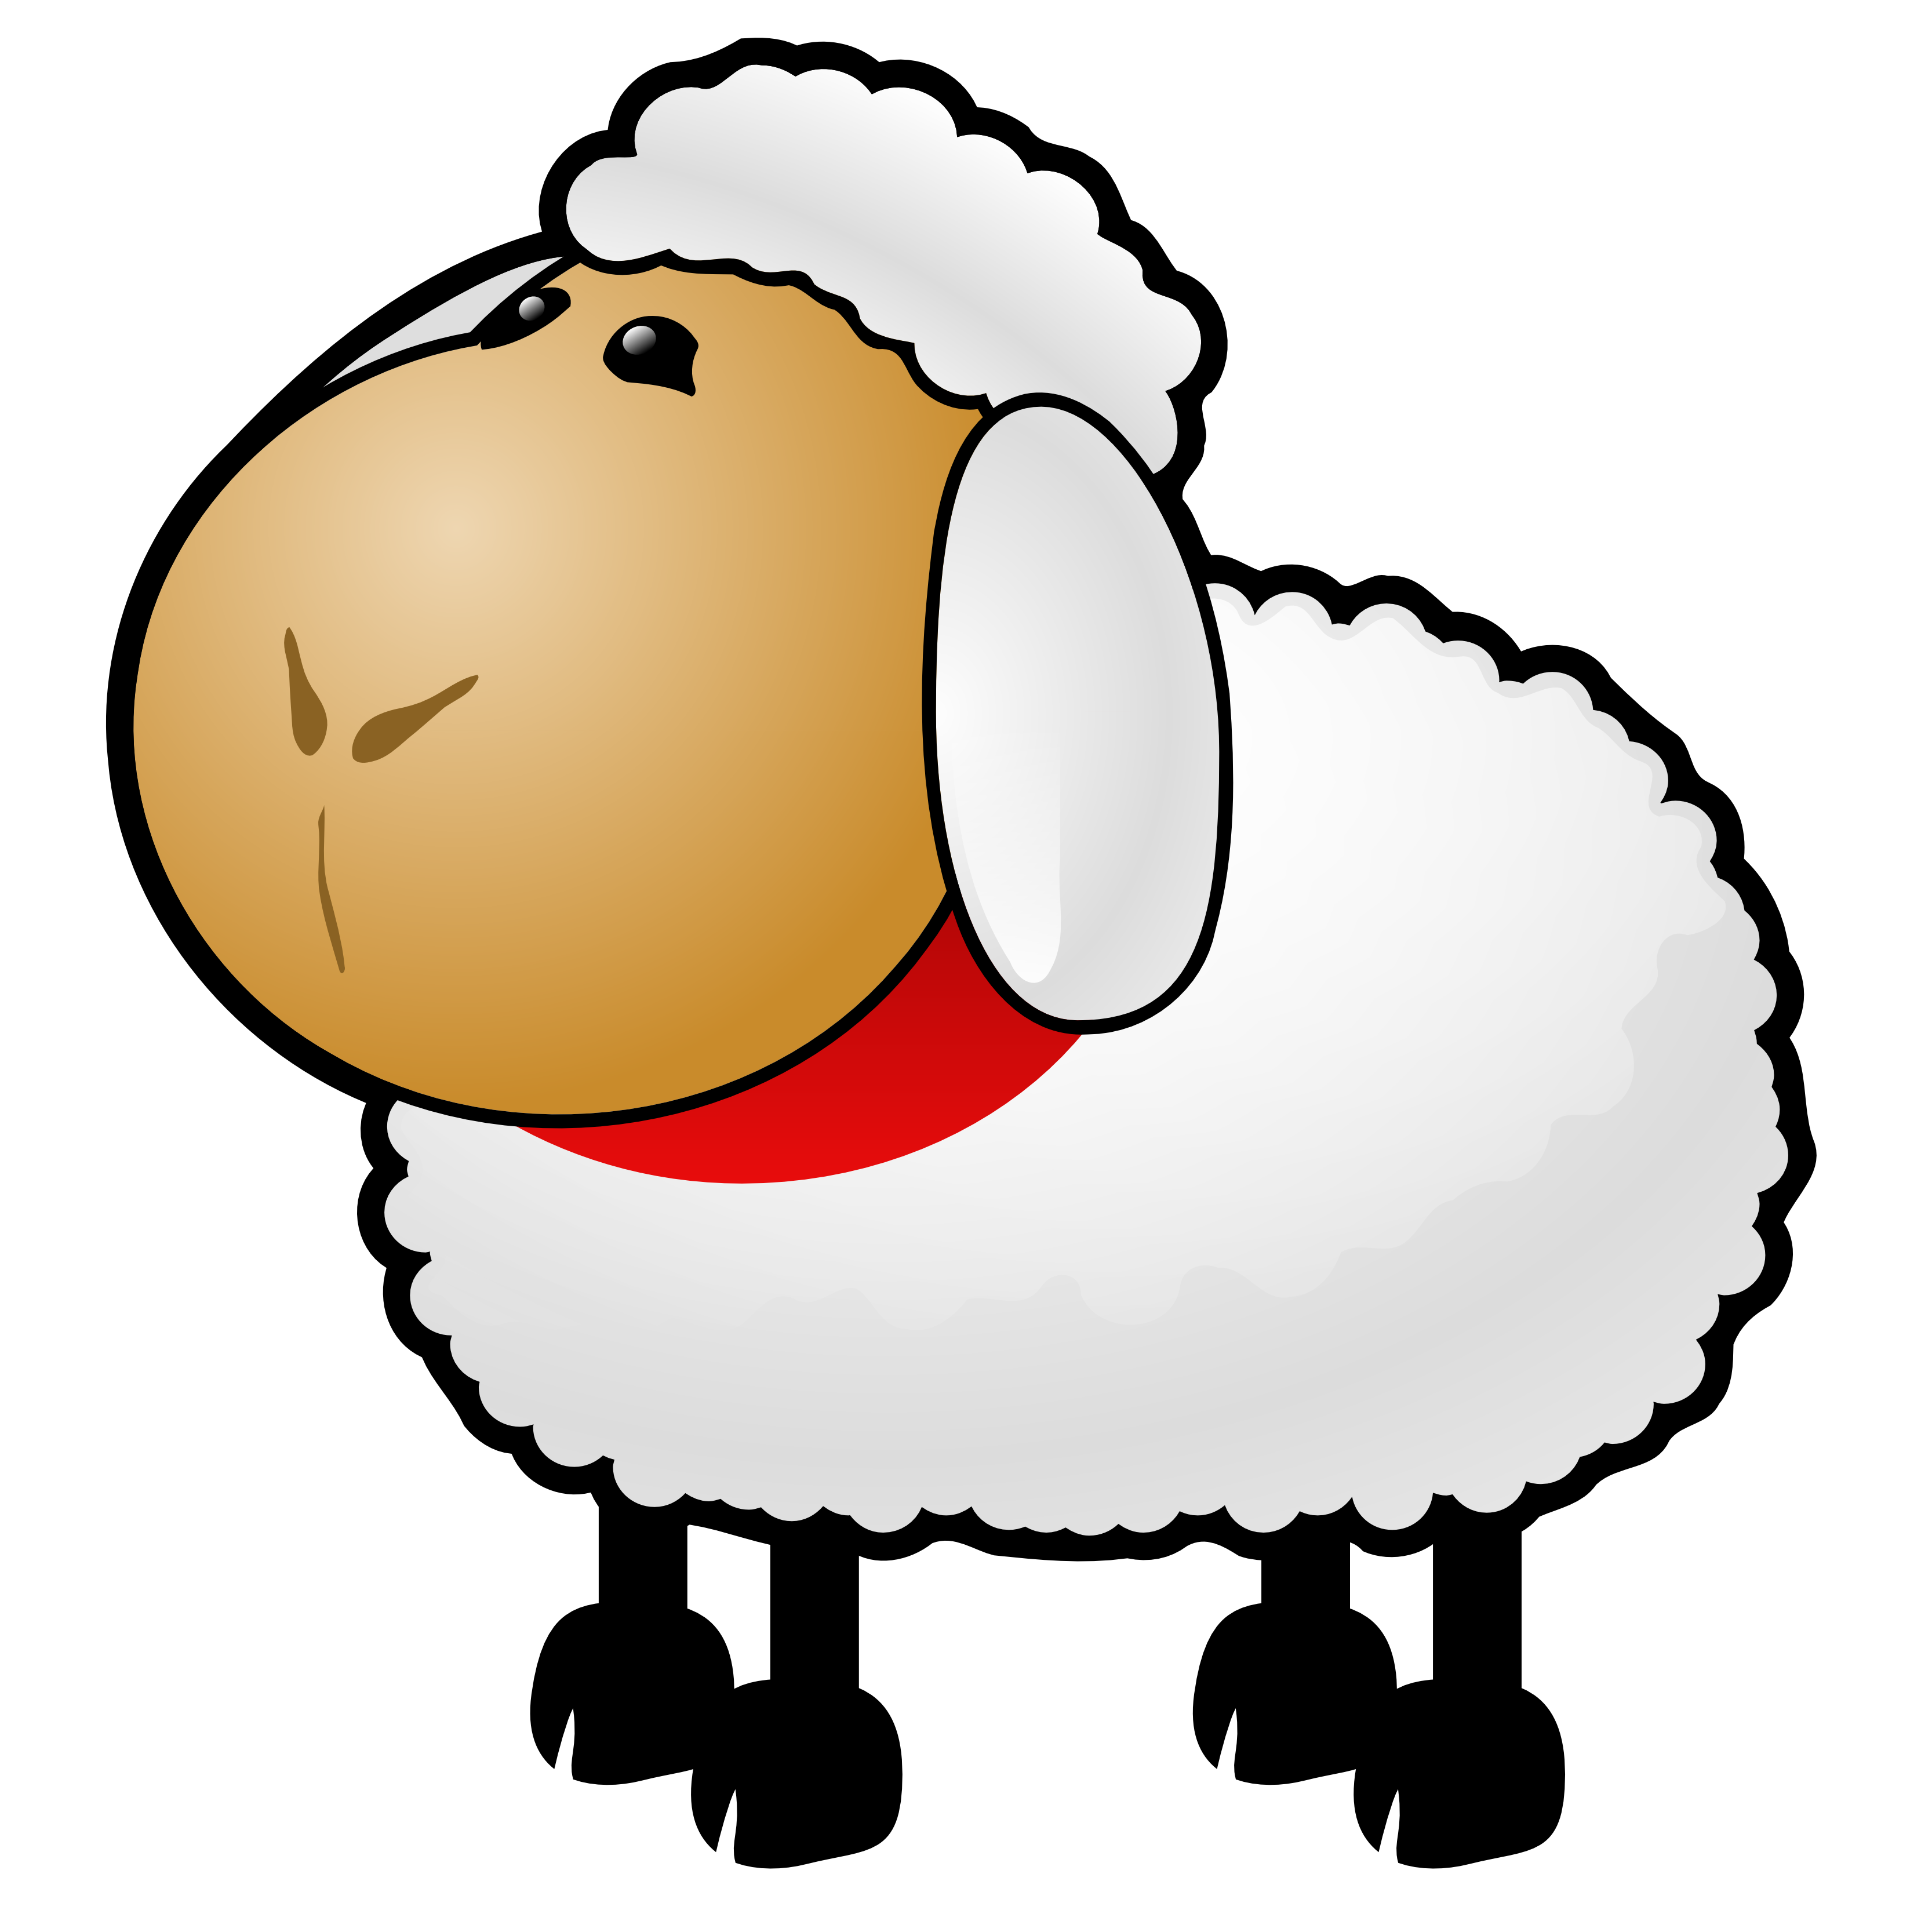 Goat clipart chiva. Lamb pencil and in